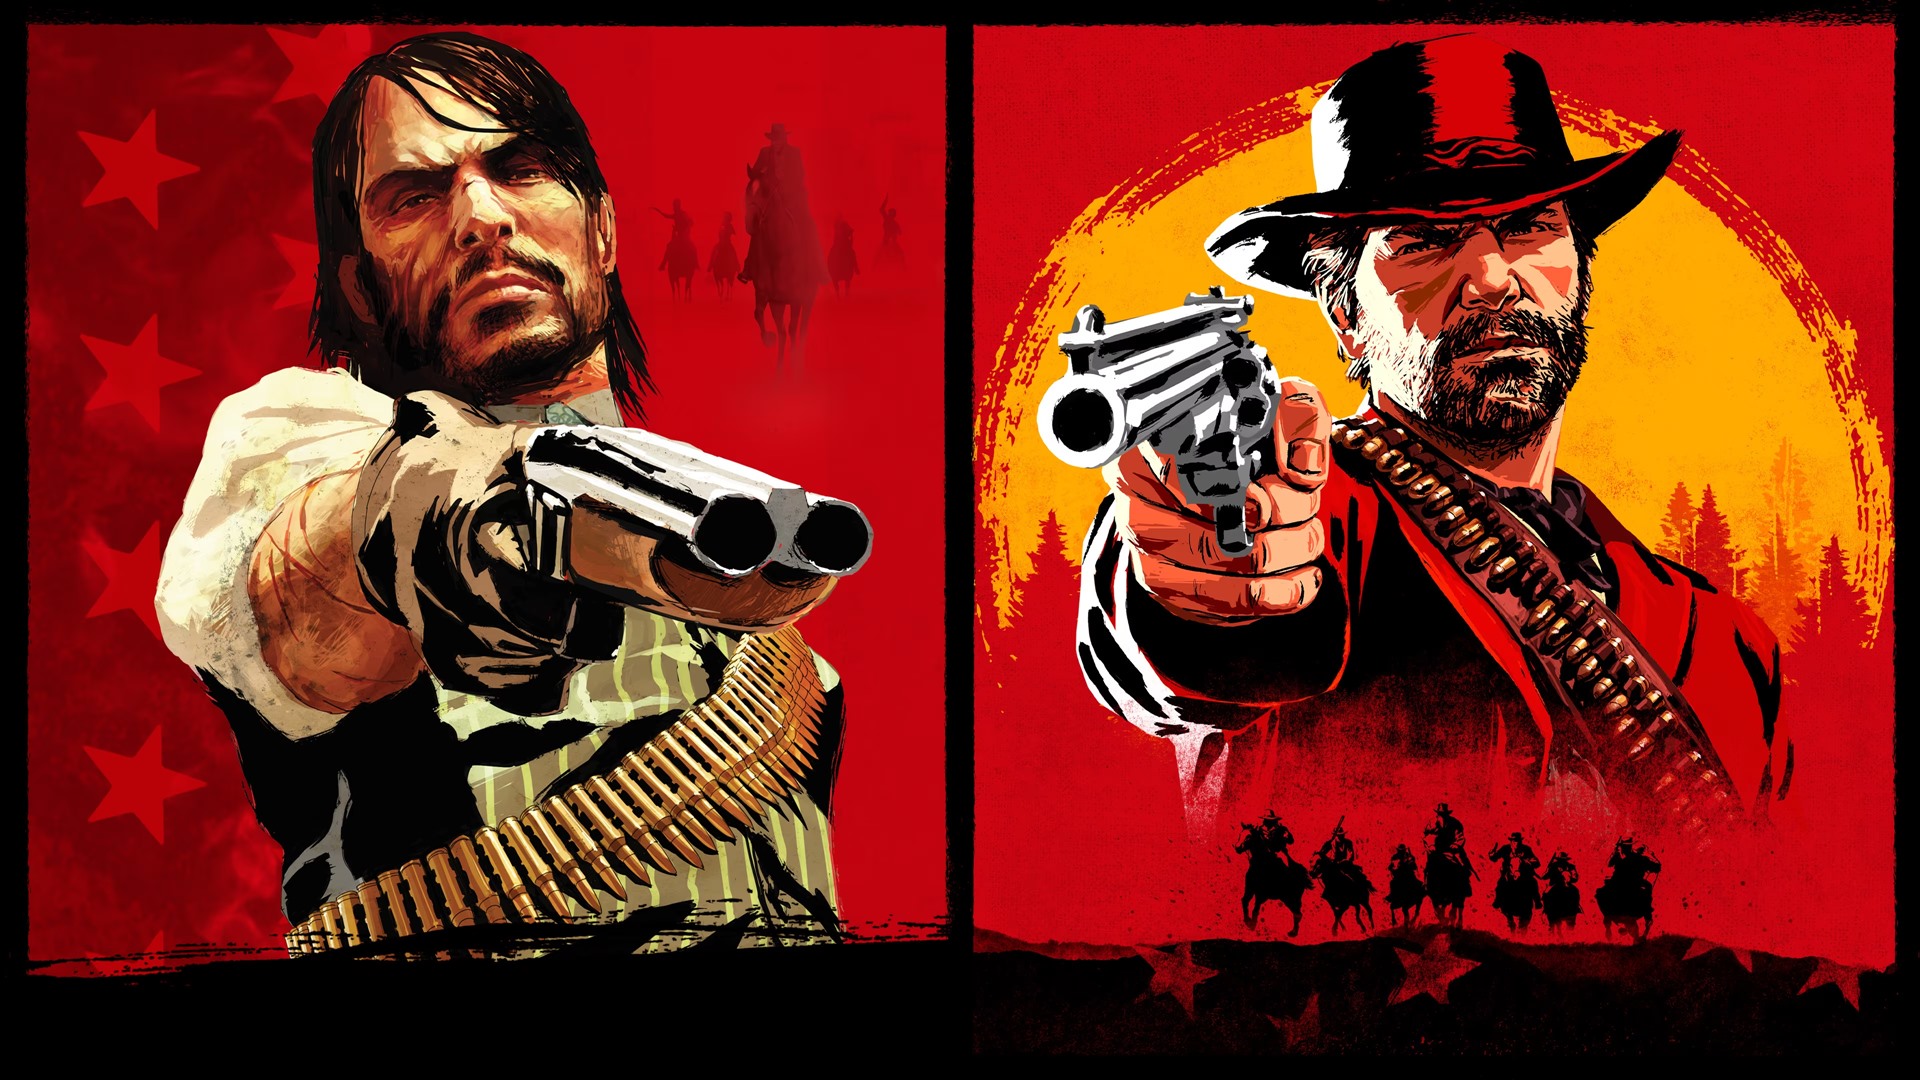 First Red Dead Redemption could soon arrive on PC, according to dataminer Tez2.